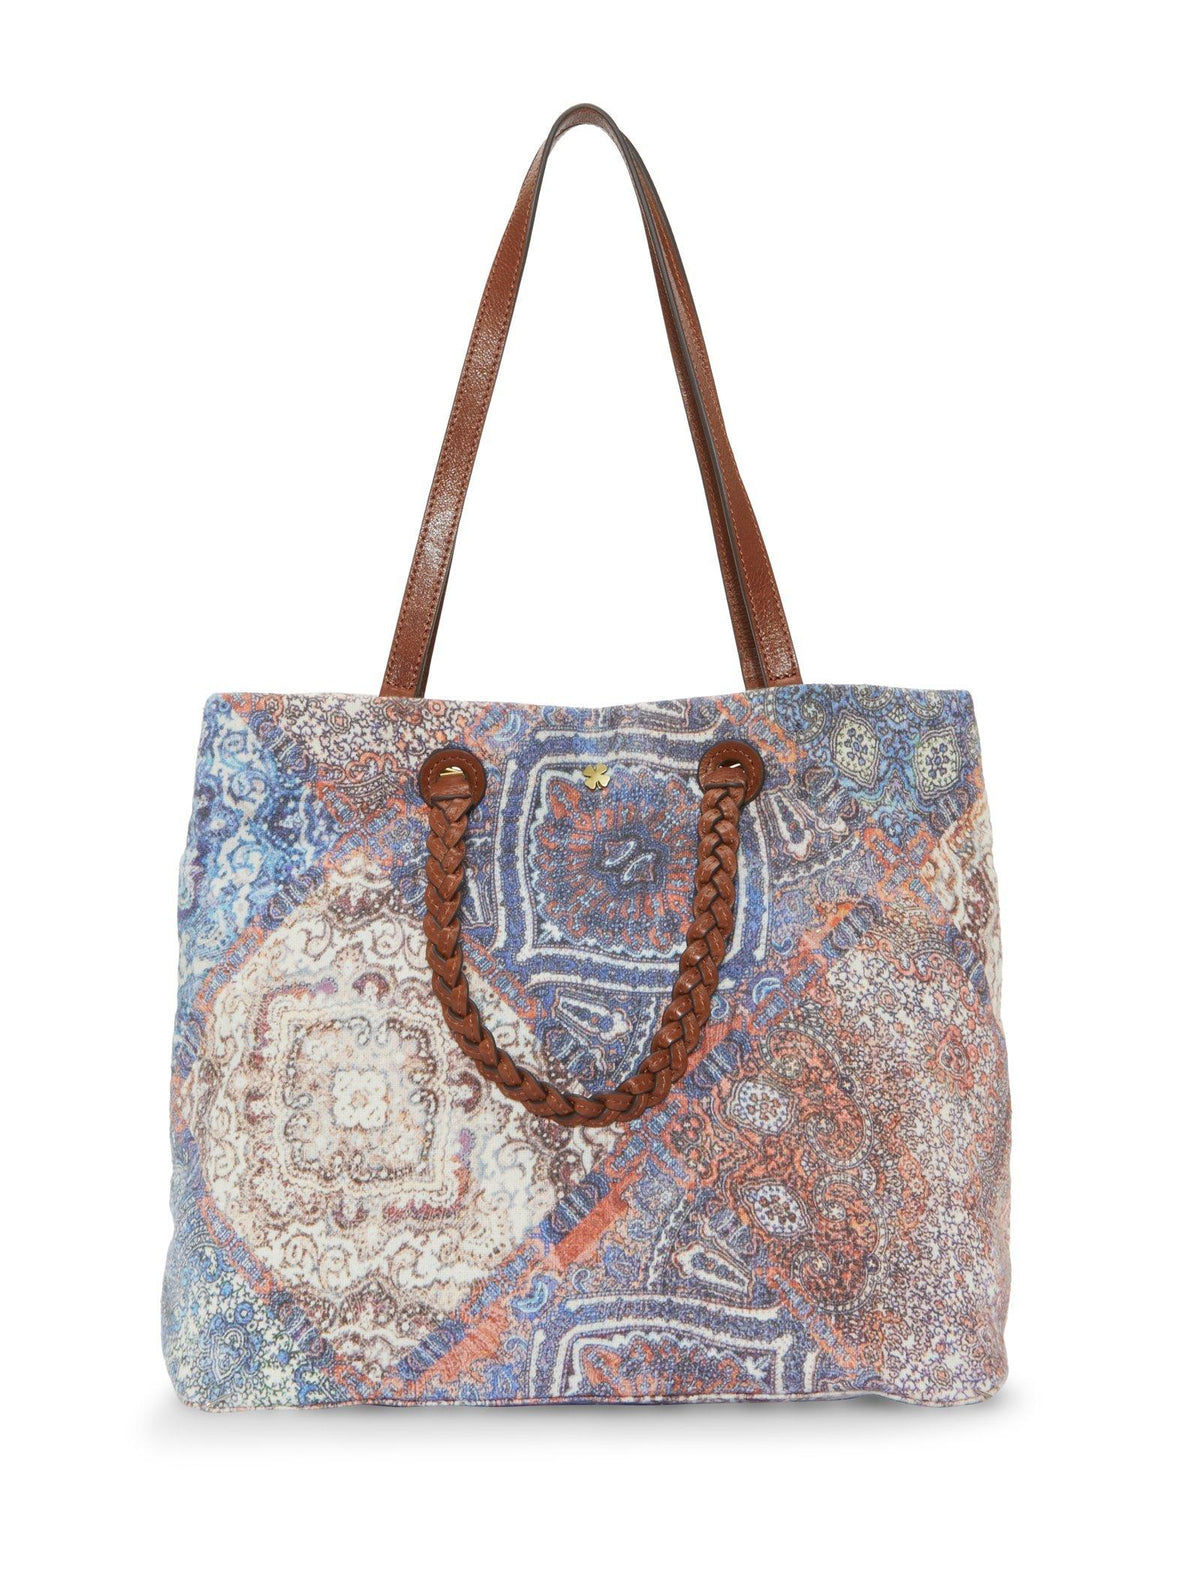 Lucky Brand Jema Tote Patch - Women's Accessories Bags Handbags Totes Heritage Patchwork